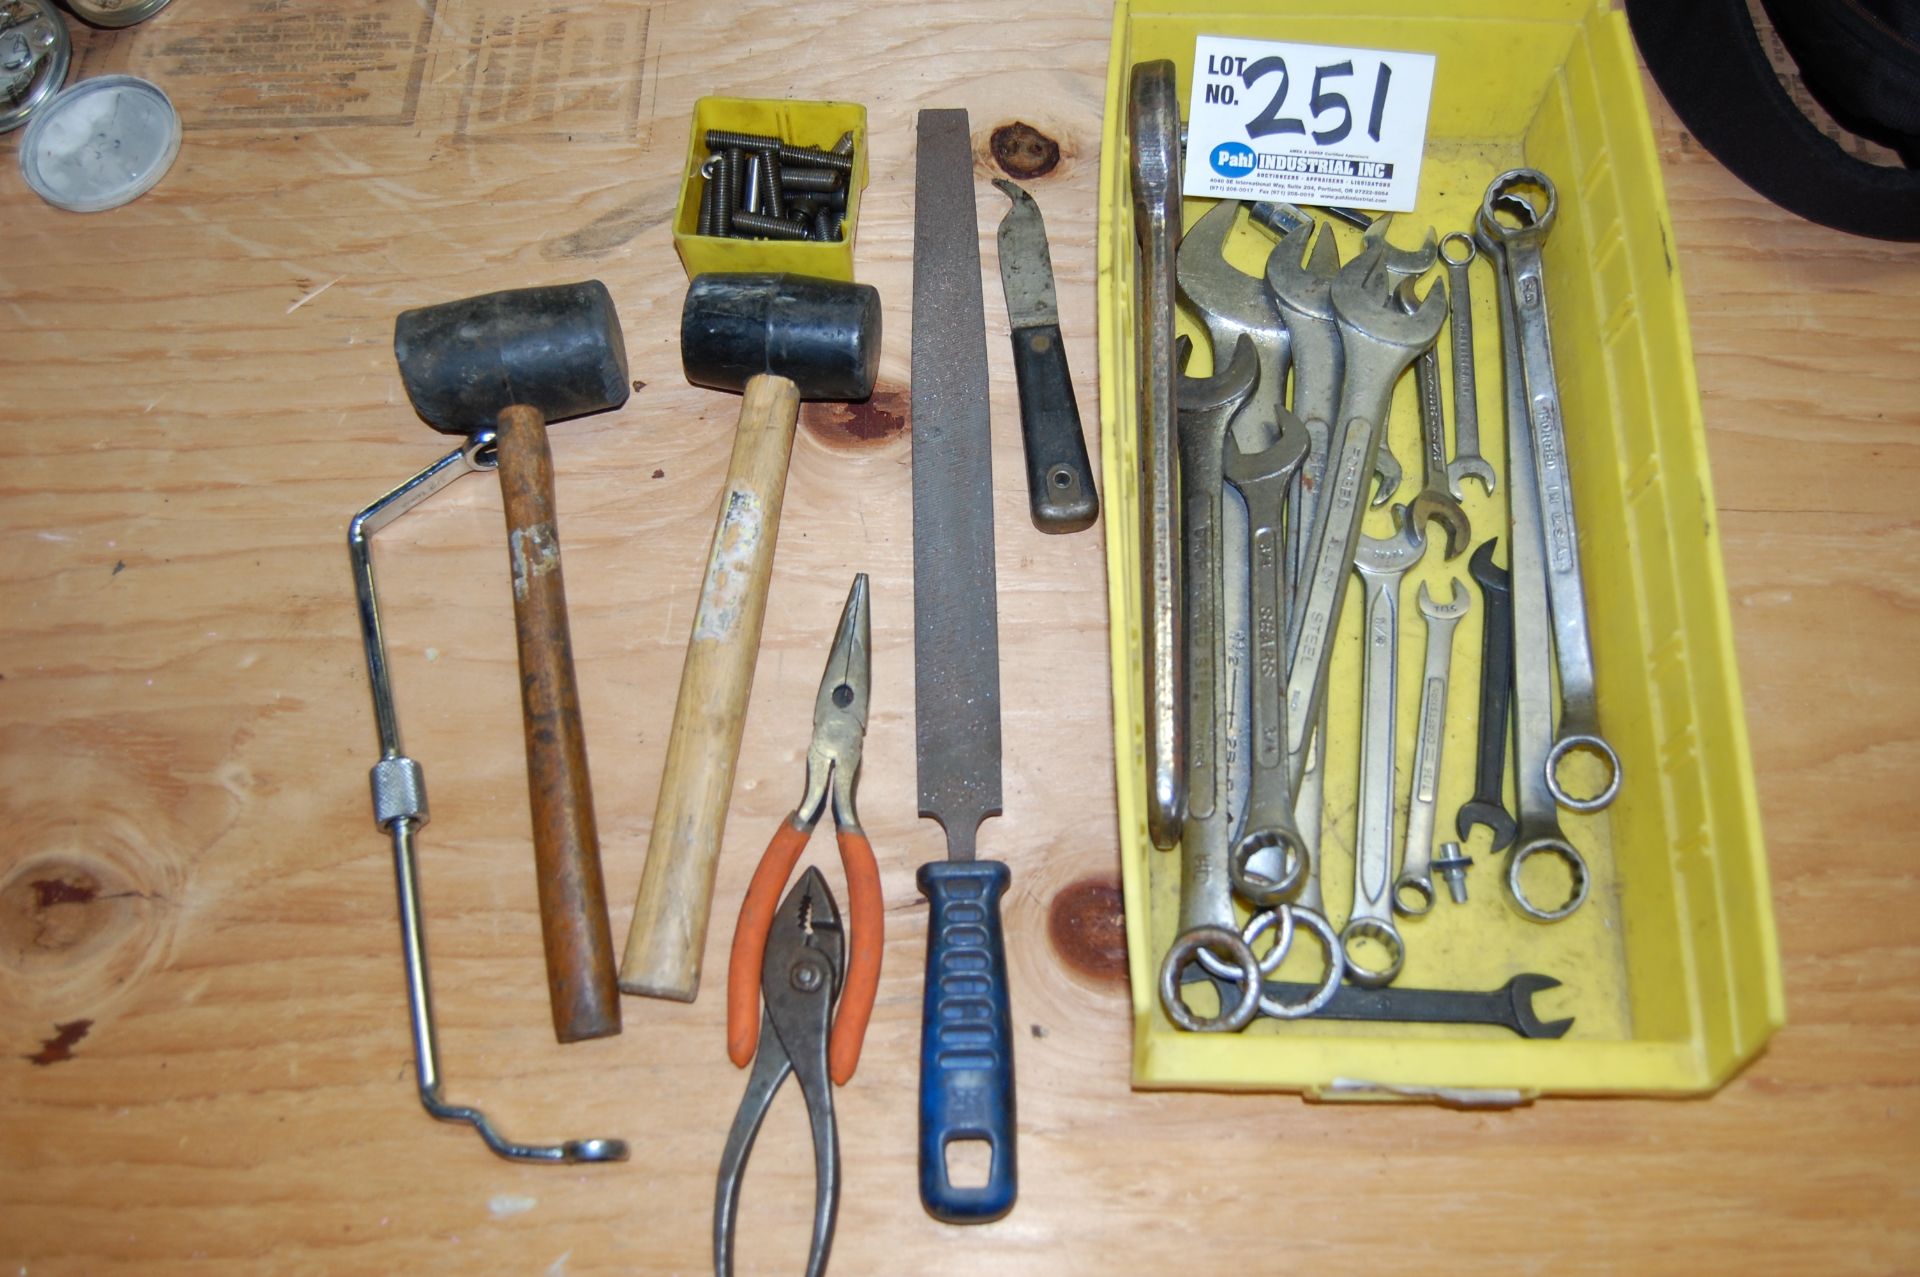 Assorted Hand Tools Rubber Mallets, open/box end wrenches, file etc